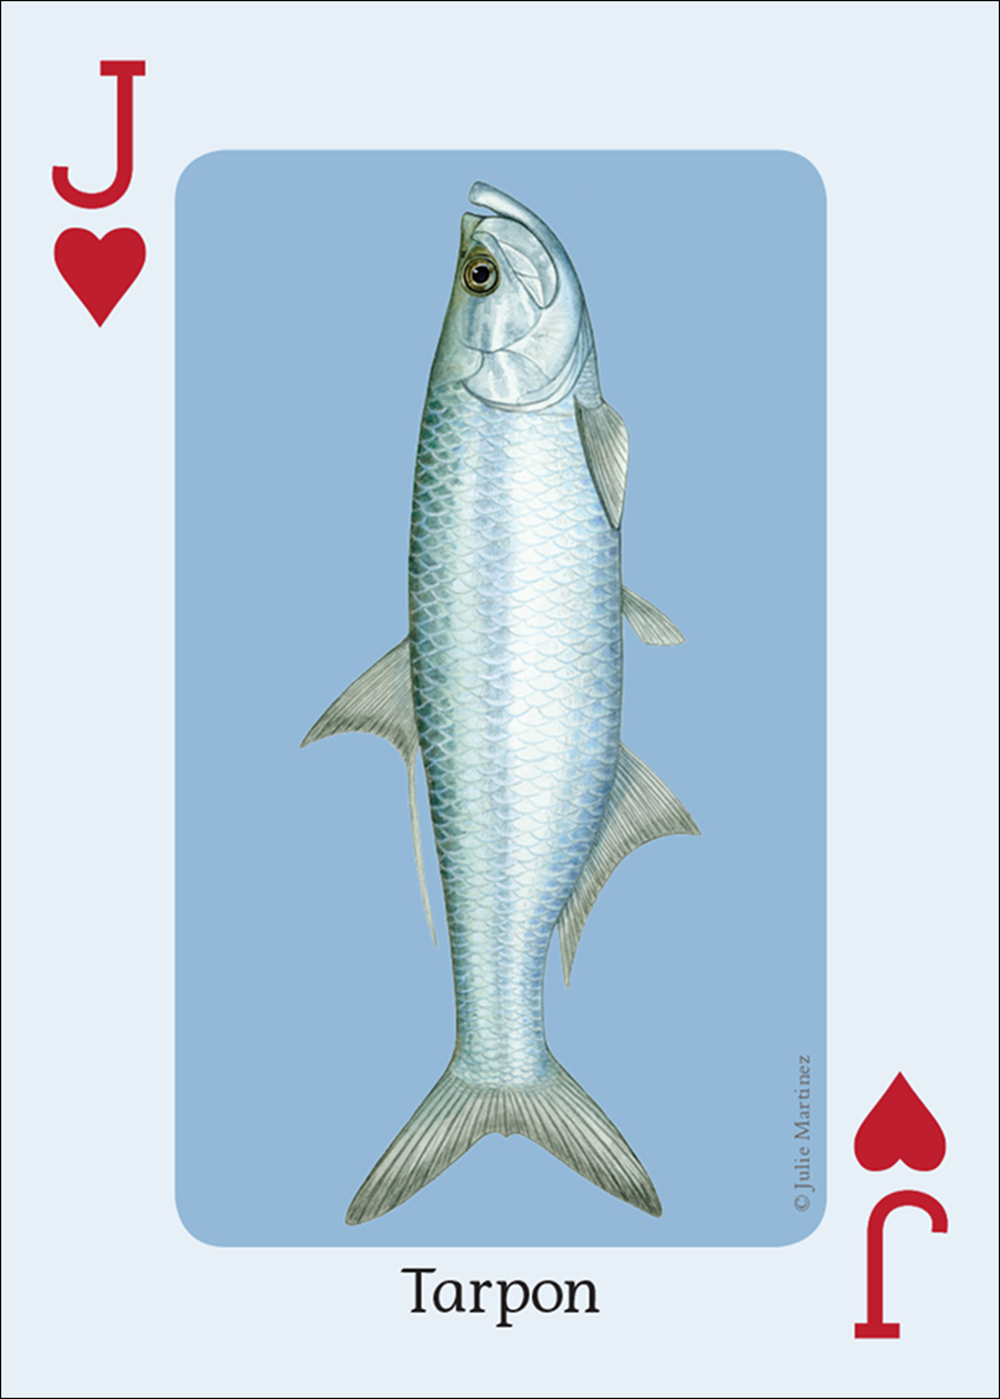 Saltwater Fish of the Gulf & Atlantic Playing Cards